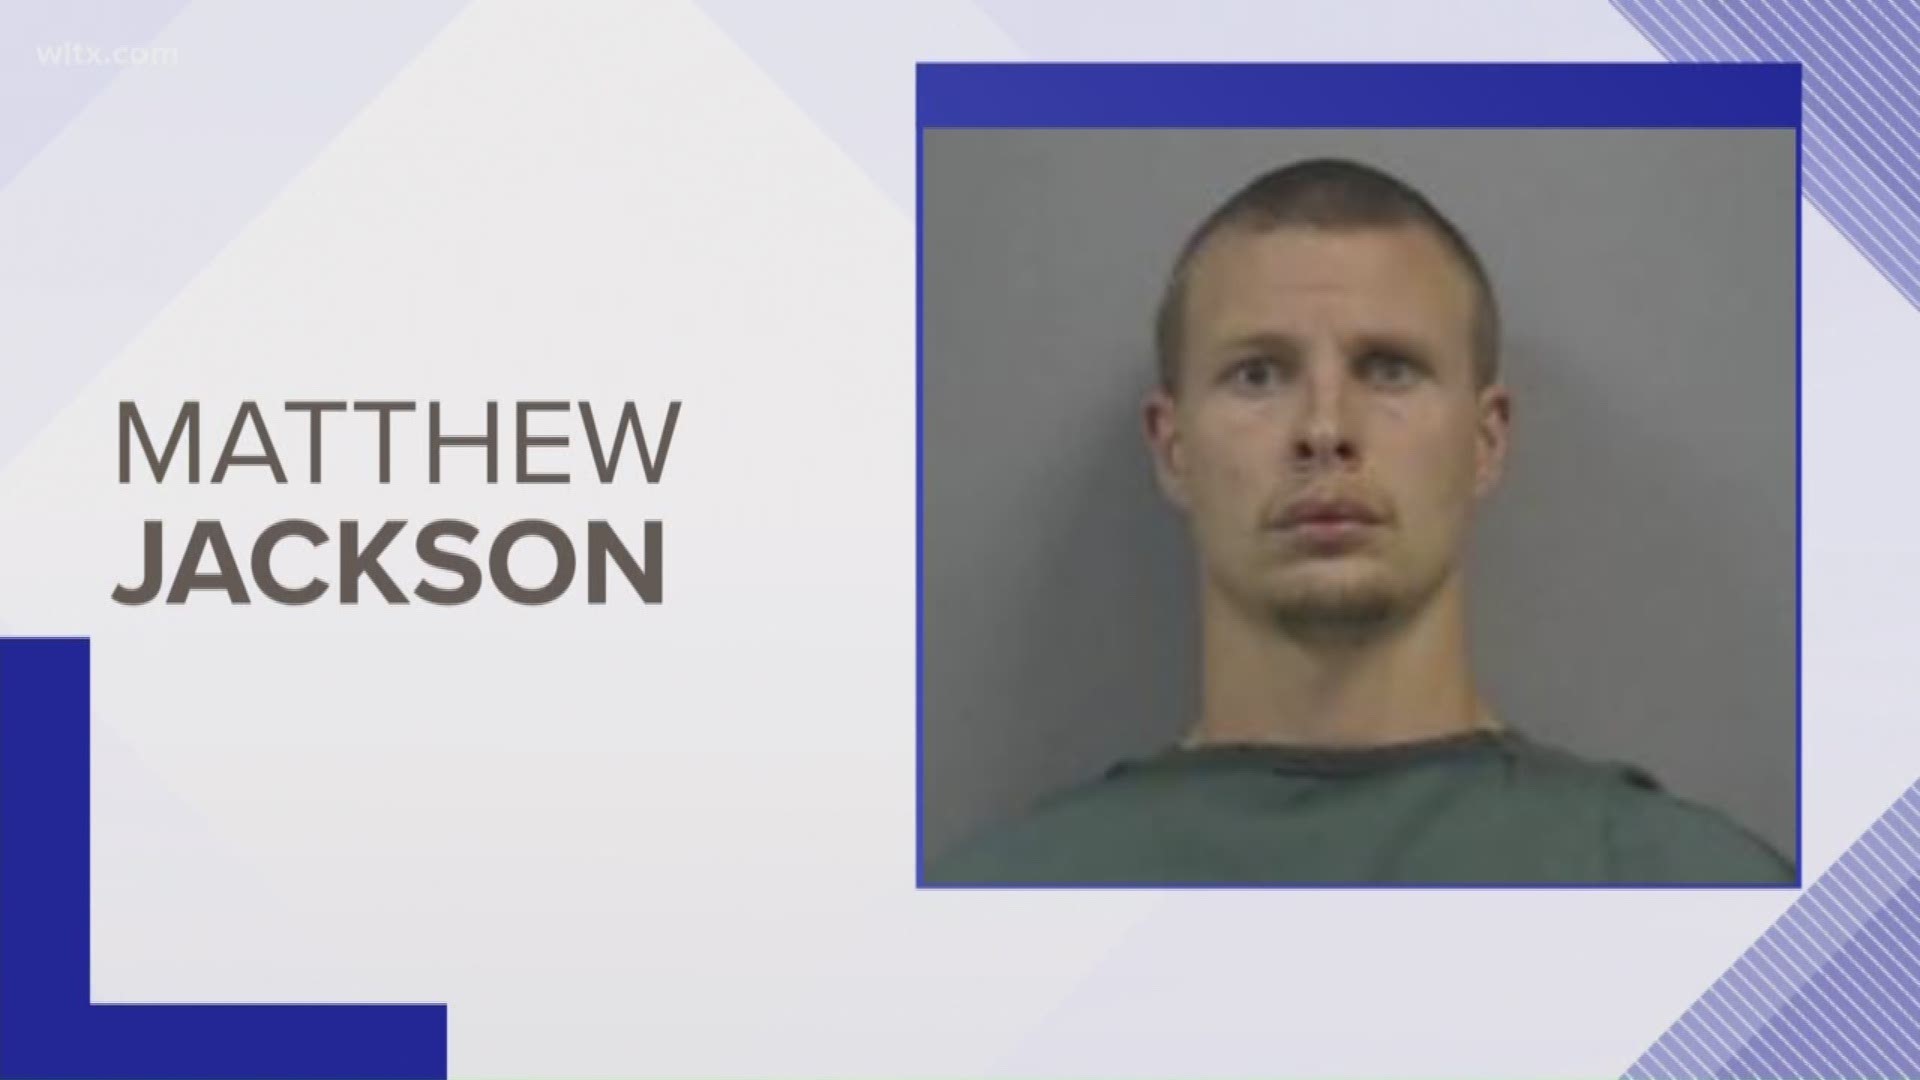 Newberry deputies are looking for an attempted murder suspect. Matthew Jackson, 28 is accused of stabbing a man after an arguement